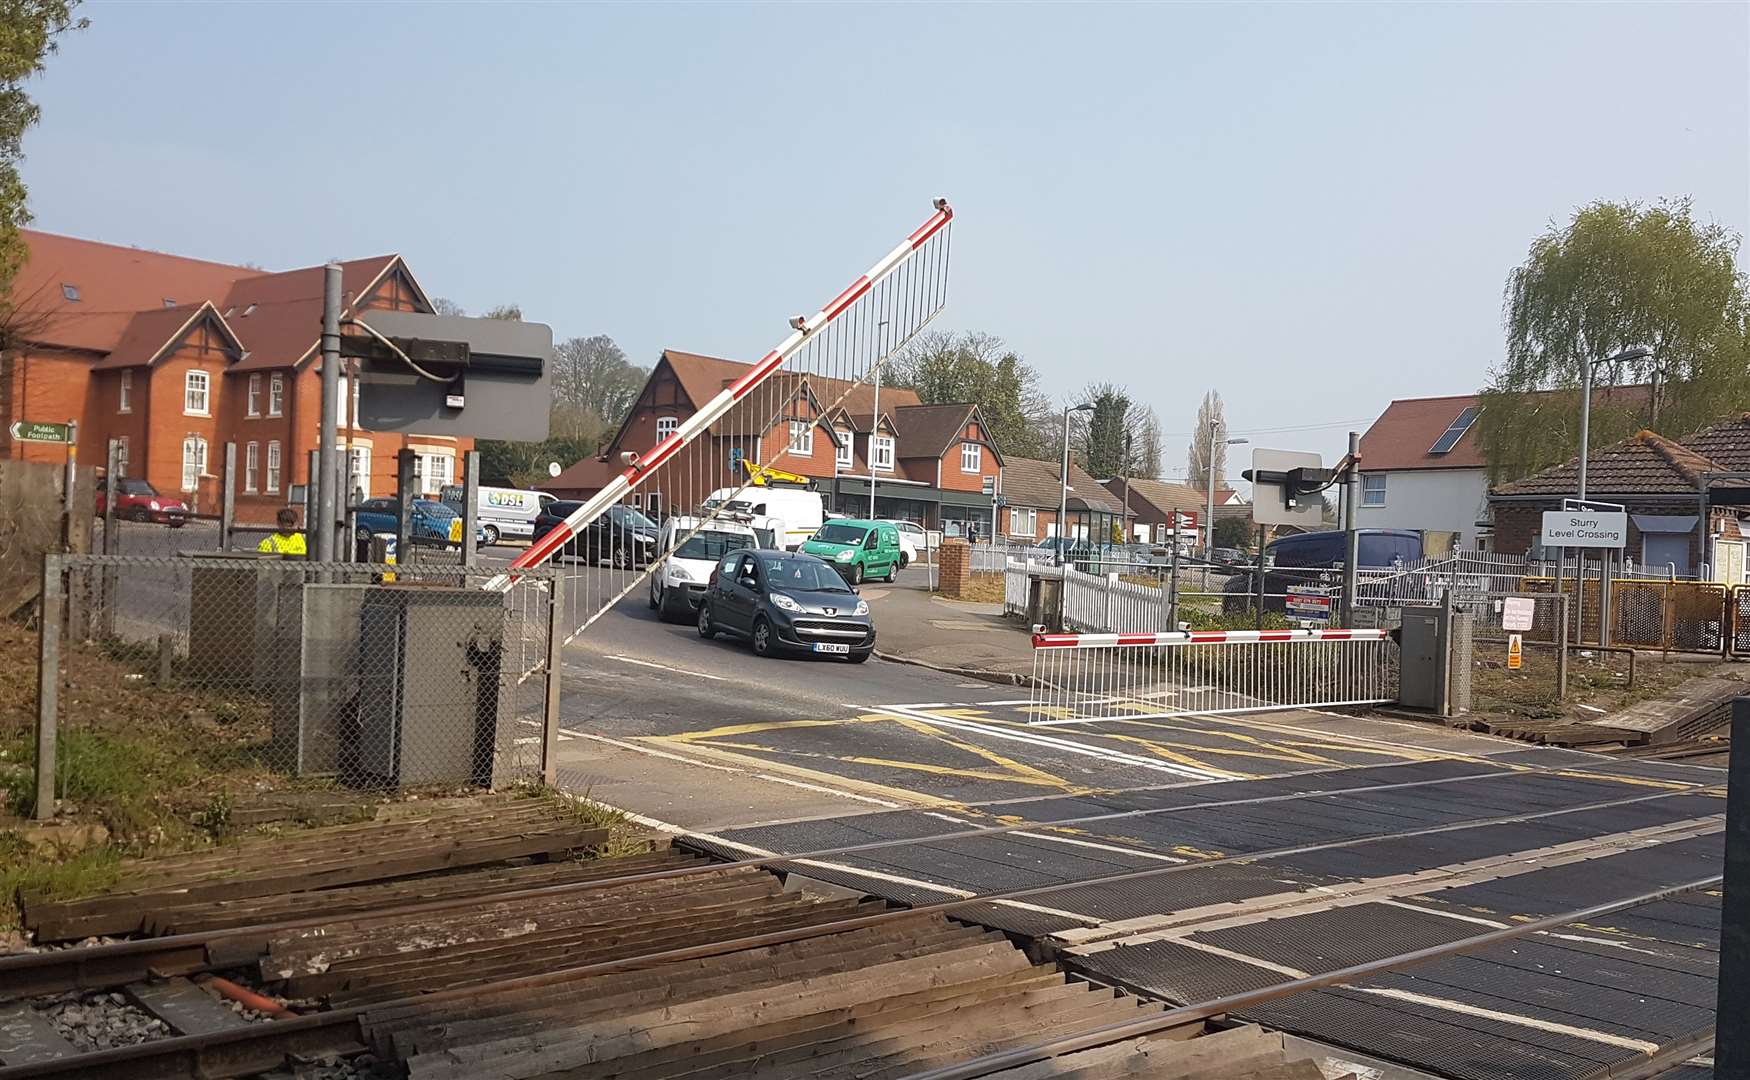 The link road should prevent the regular snarl up of traffic due to the level crossing at Sturry